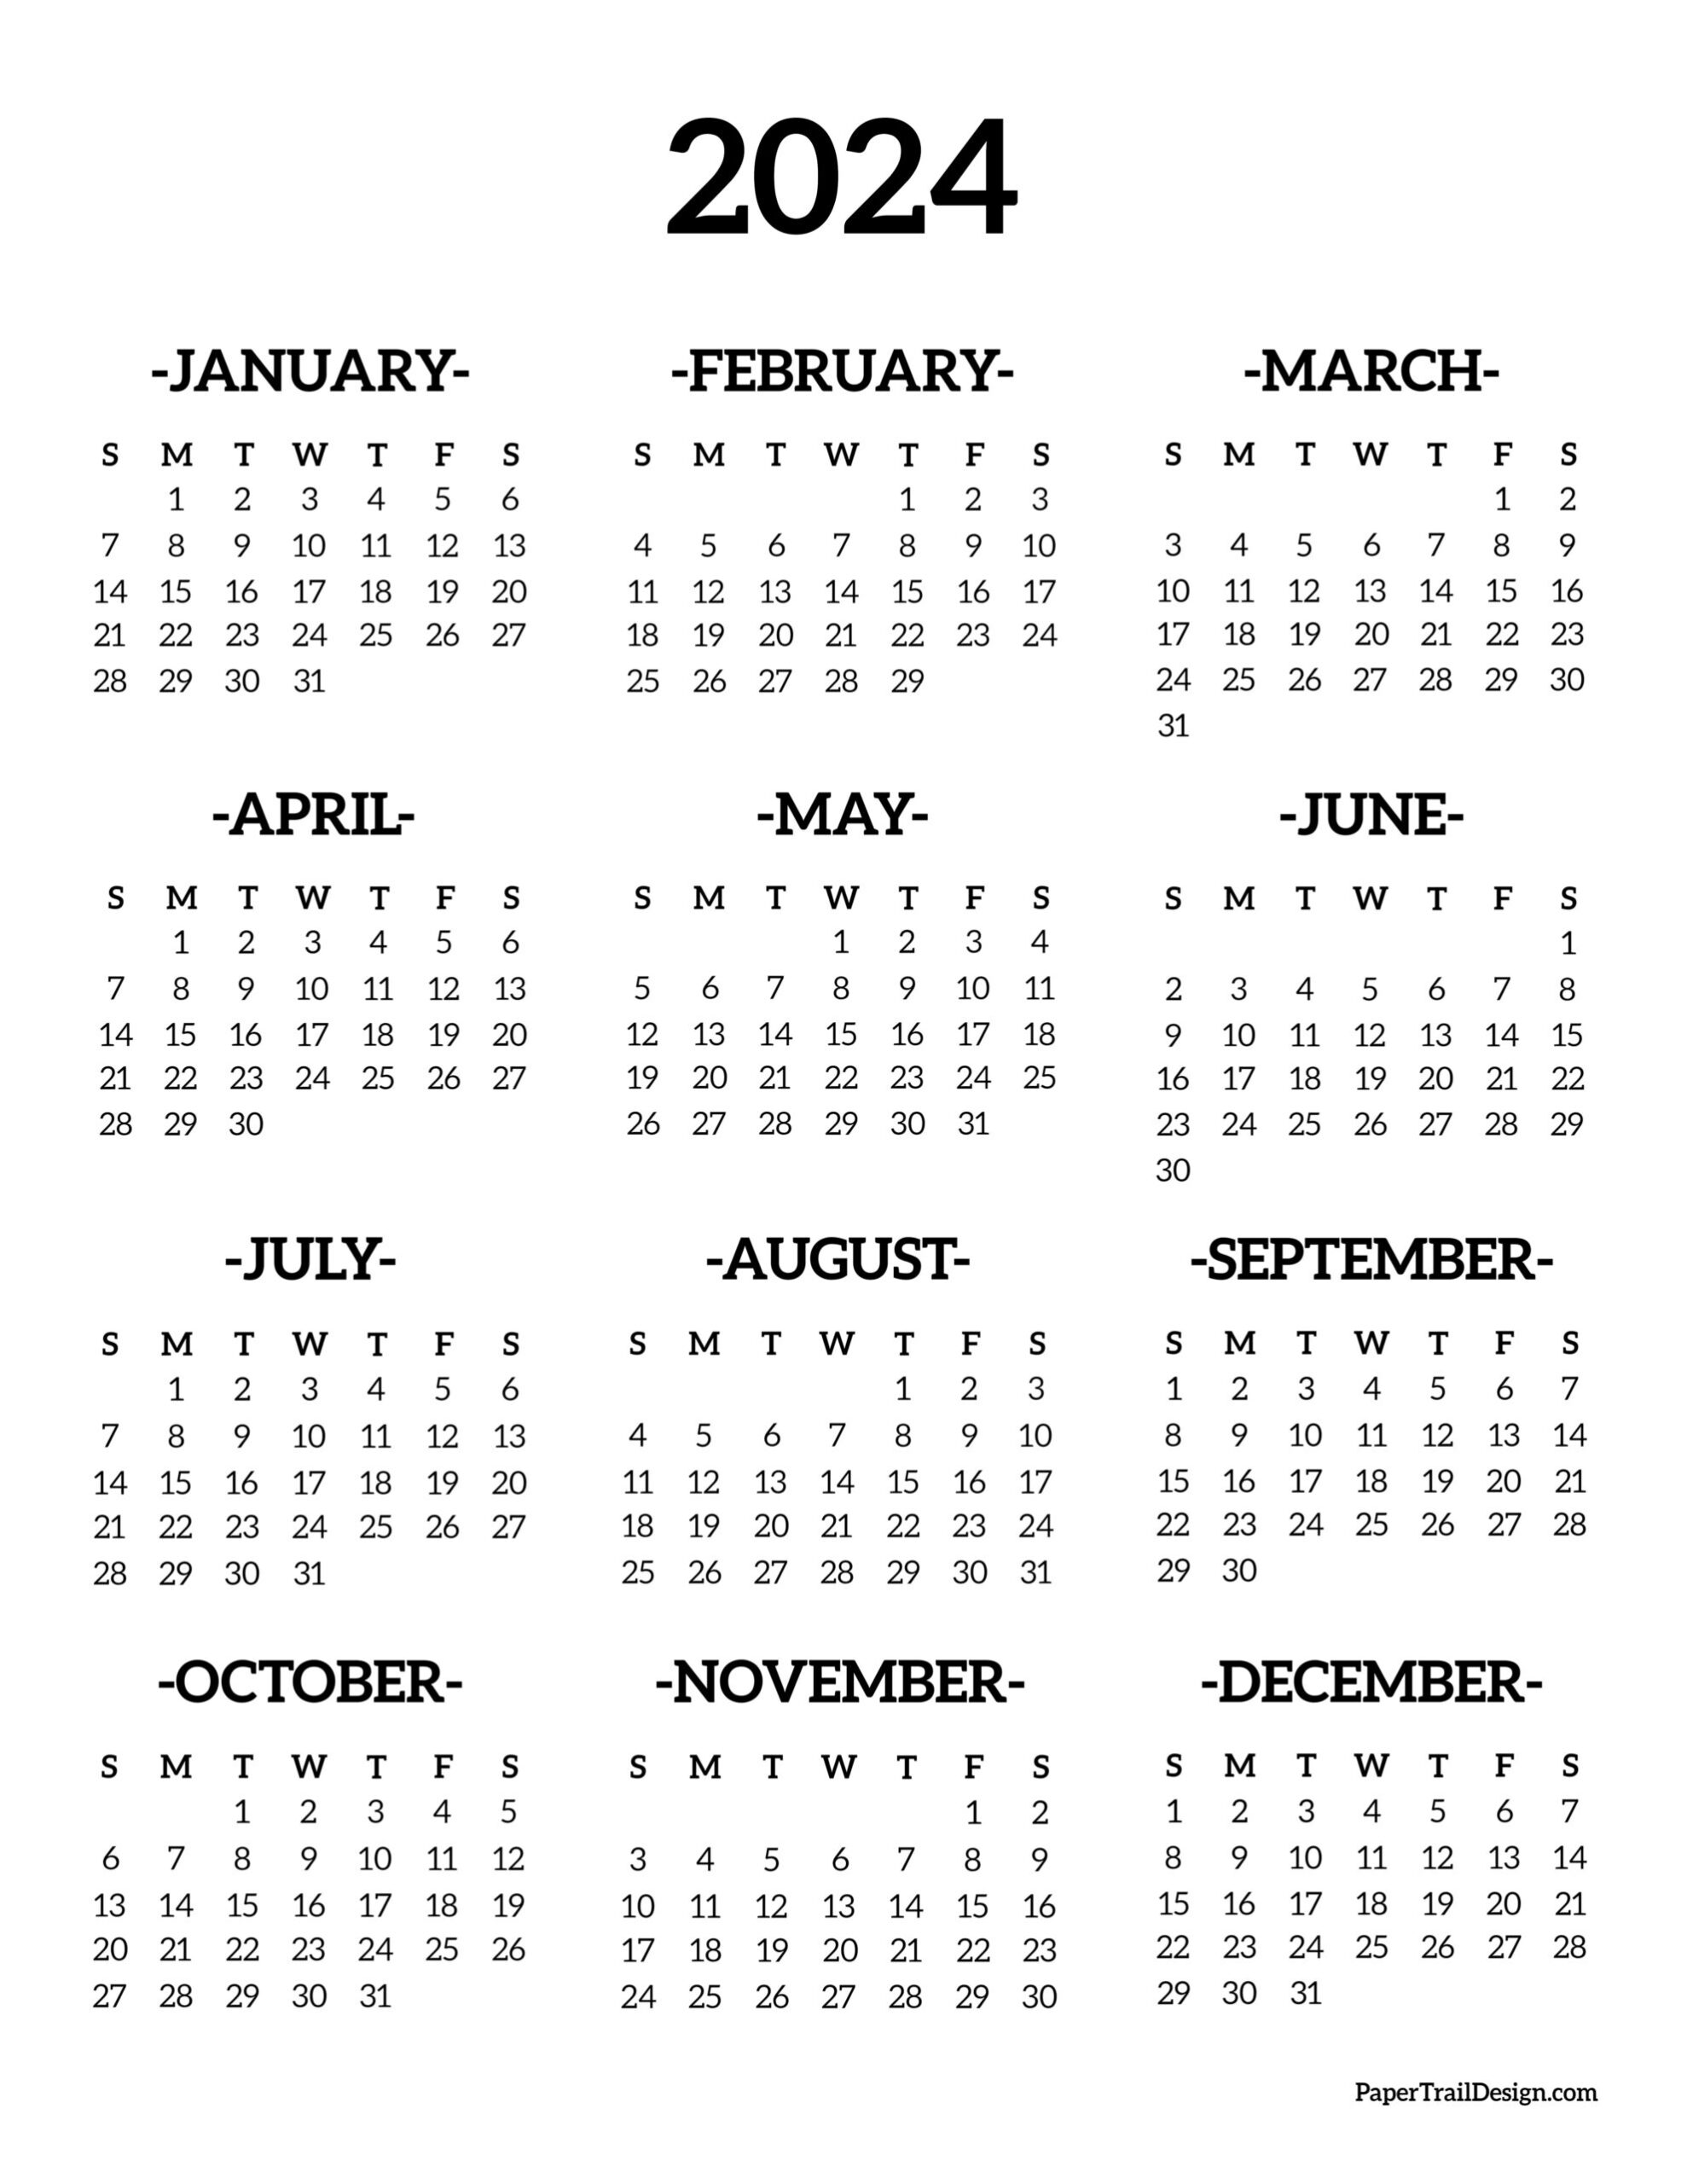 Calendar 2024 Printable One Page - Paper Trail Design | 2024 Yearly Calendar Blank